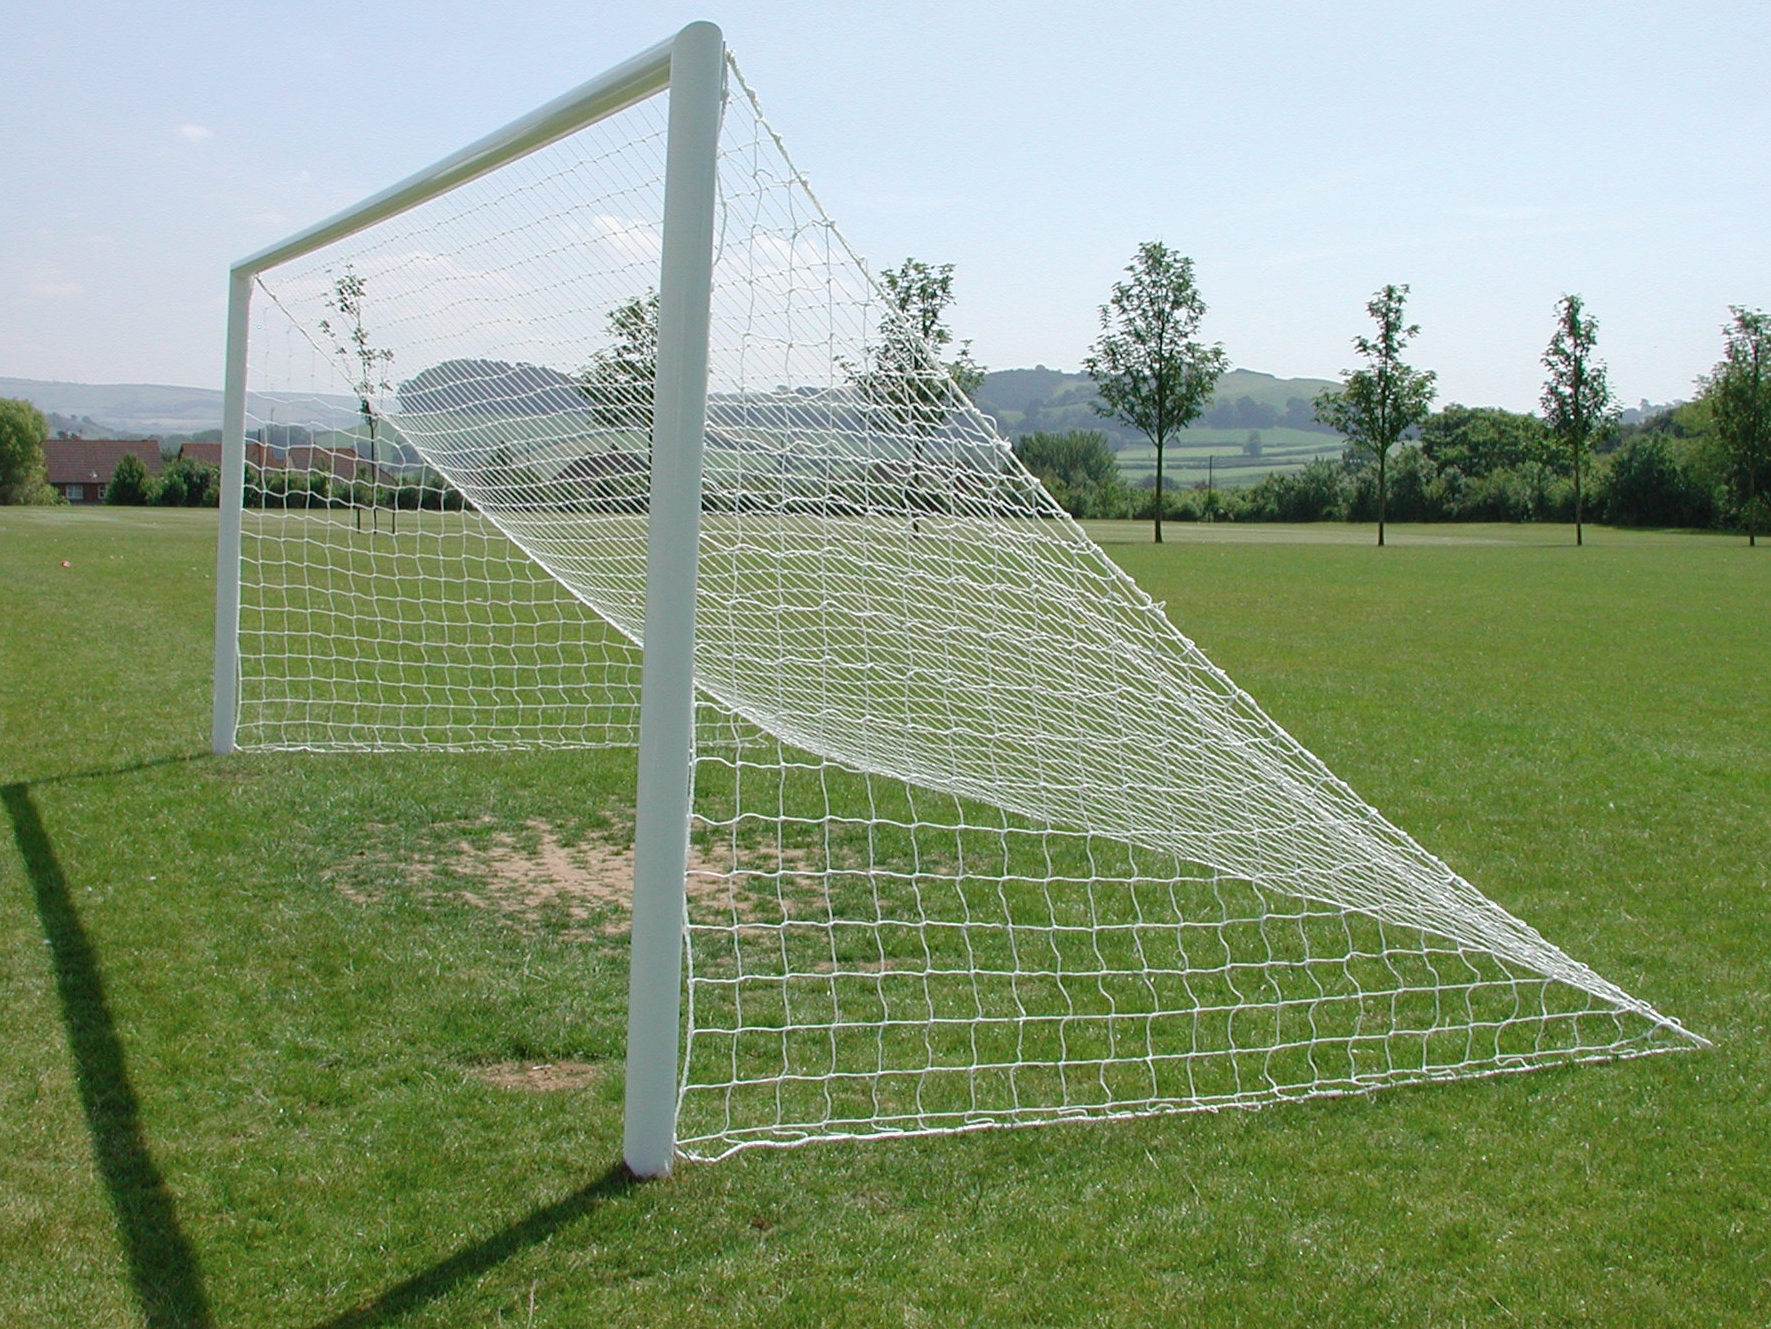 3mm Knotted goal nets with no run-backs